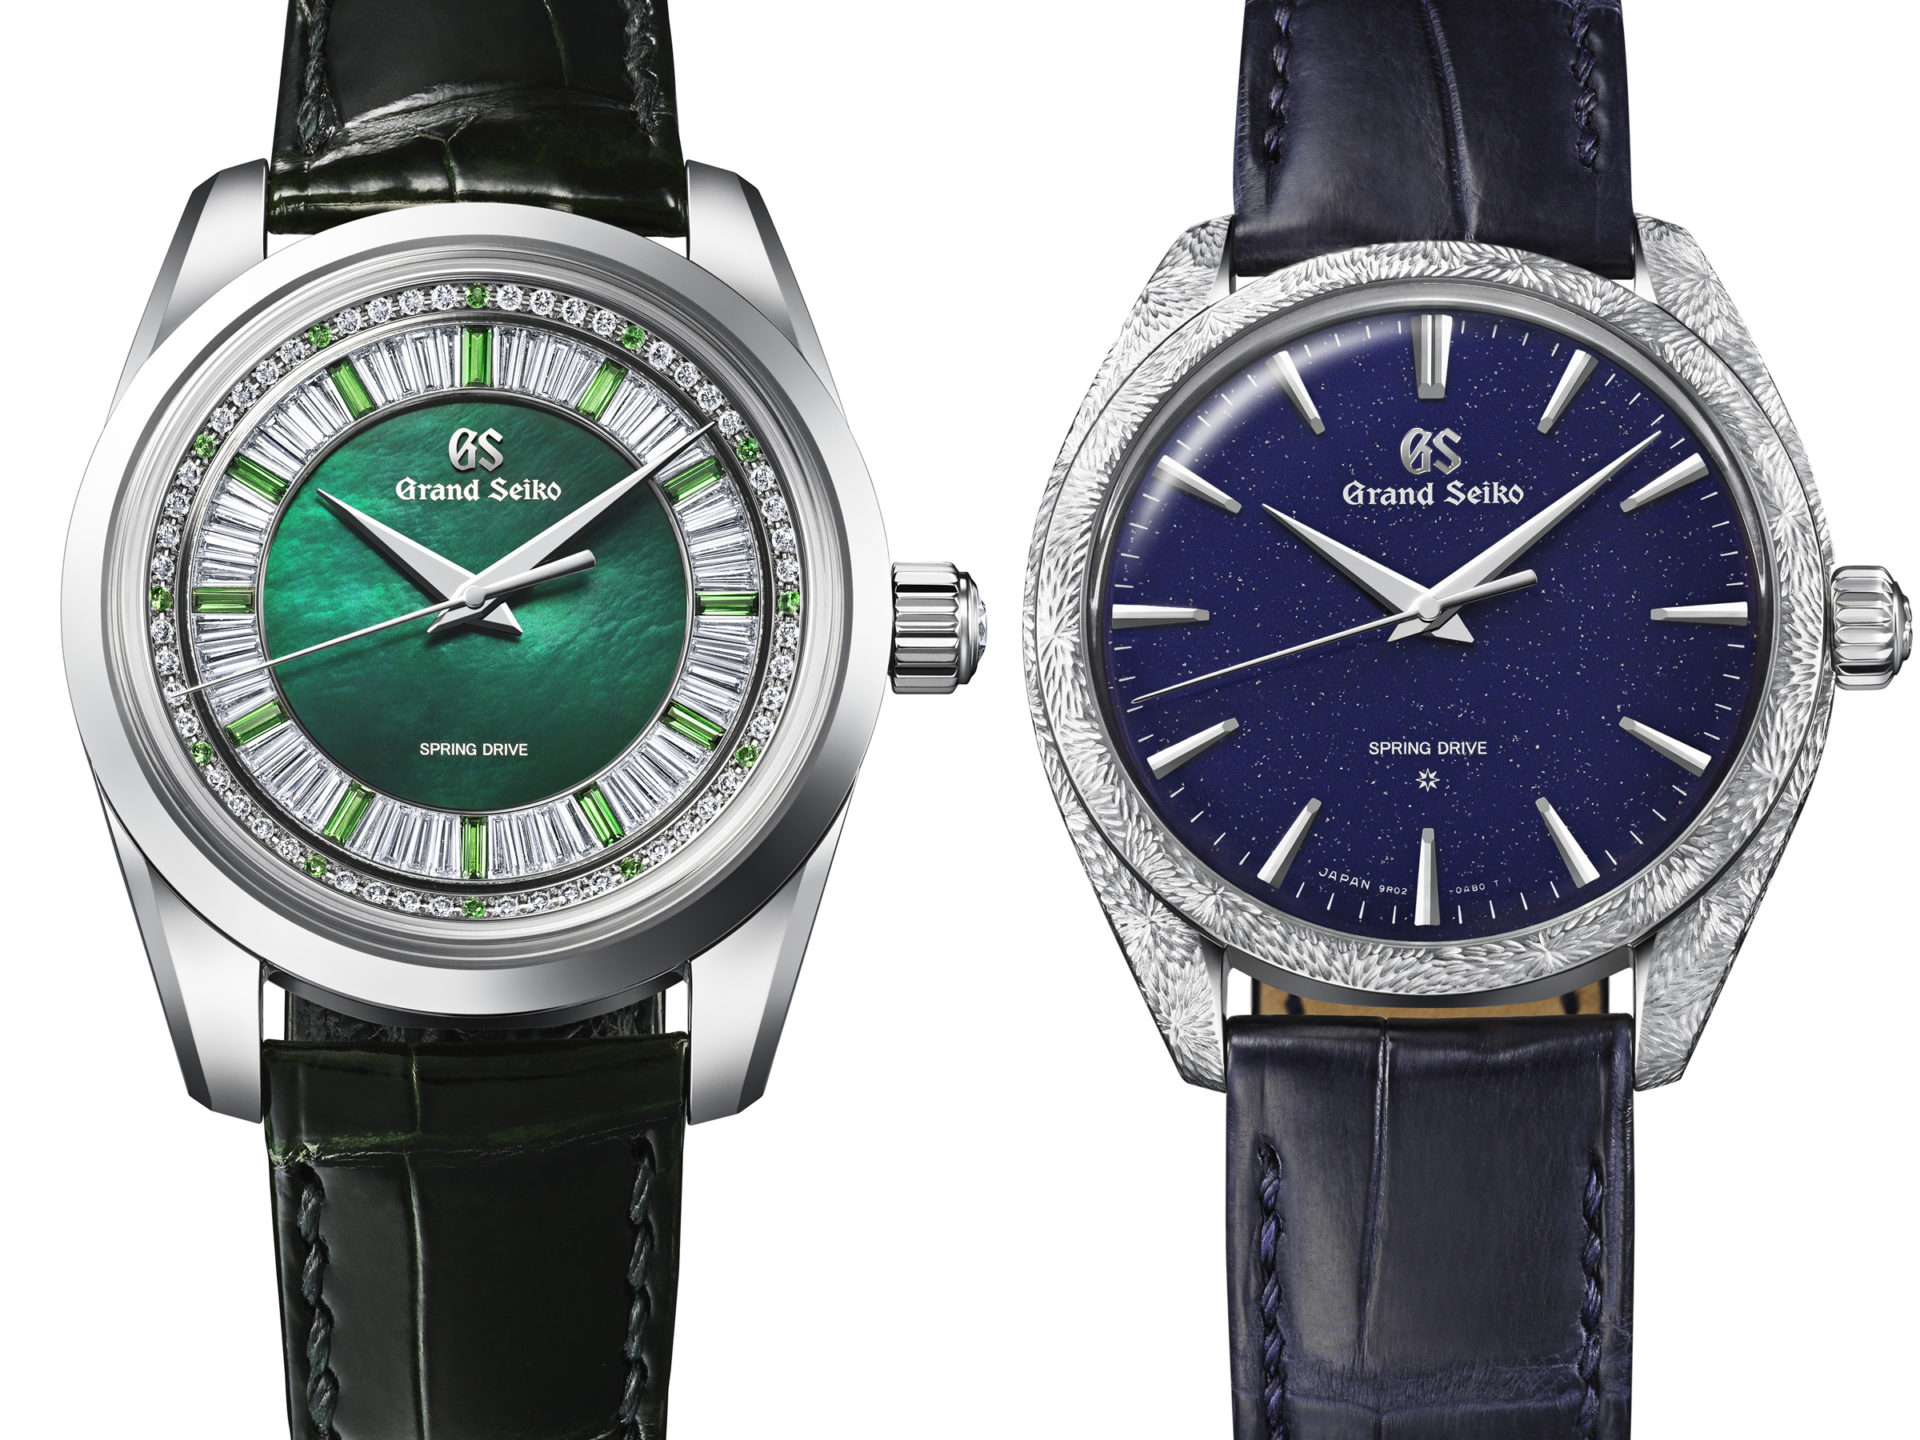 WATCHPRO Salon 2021: Grand Seiko To Make Only Presentation Of Full  Masterpiece Collection In The UK